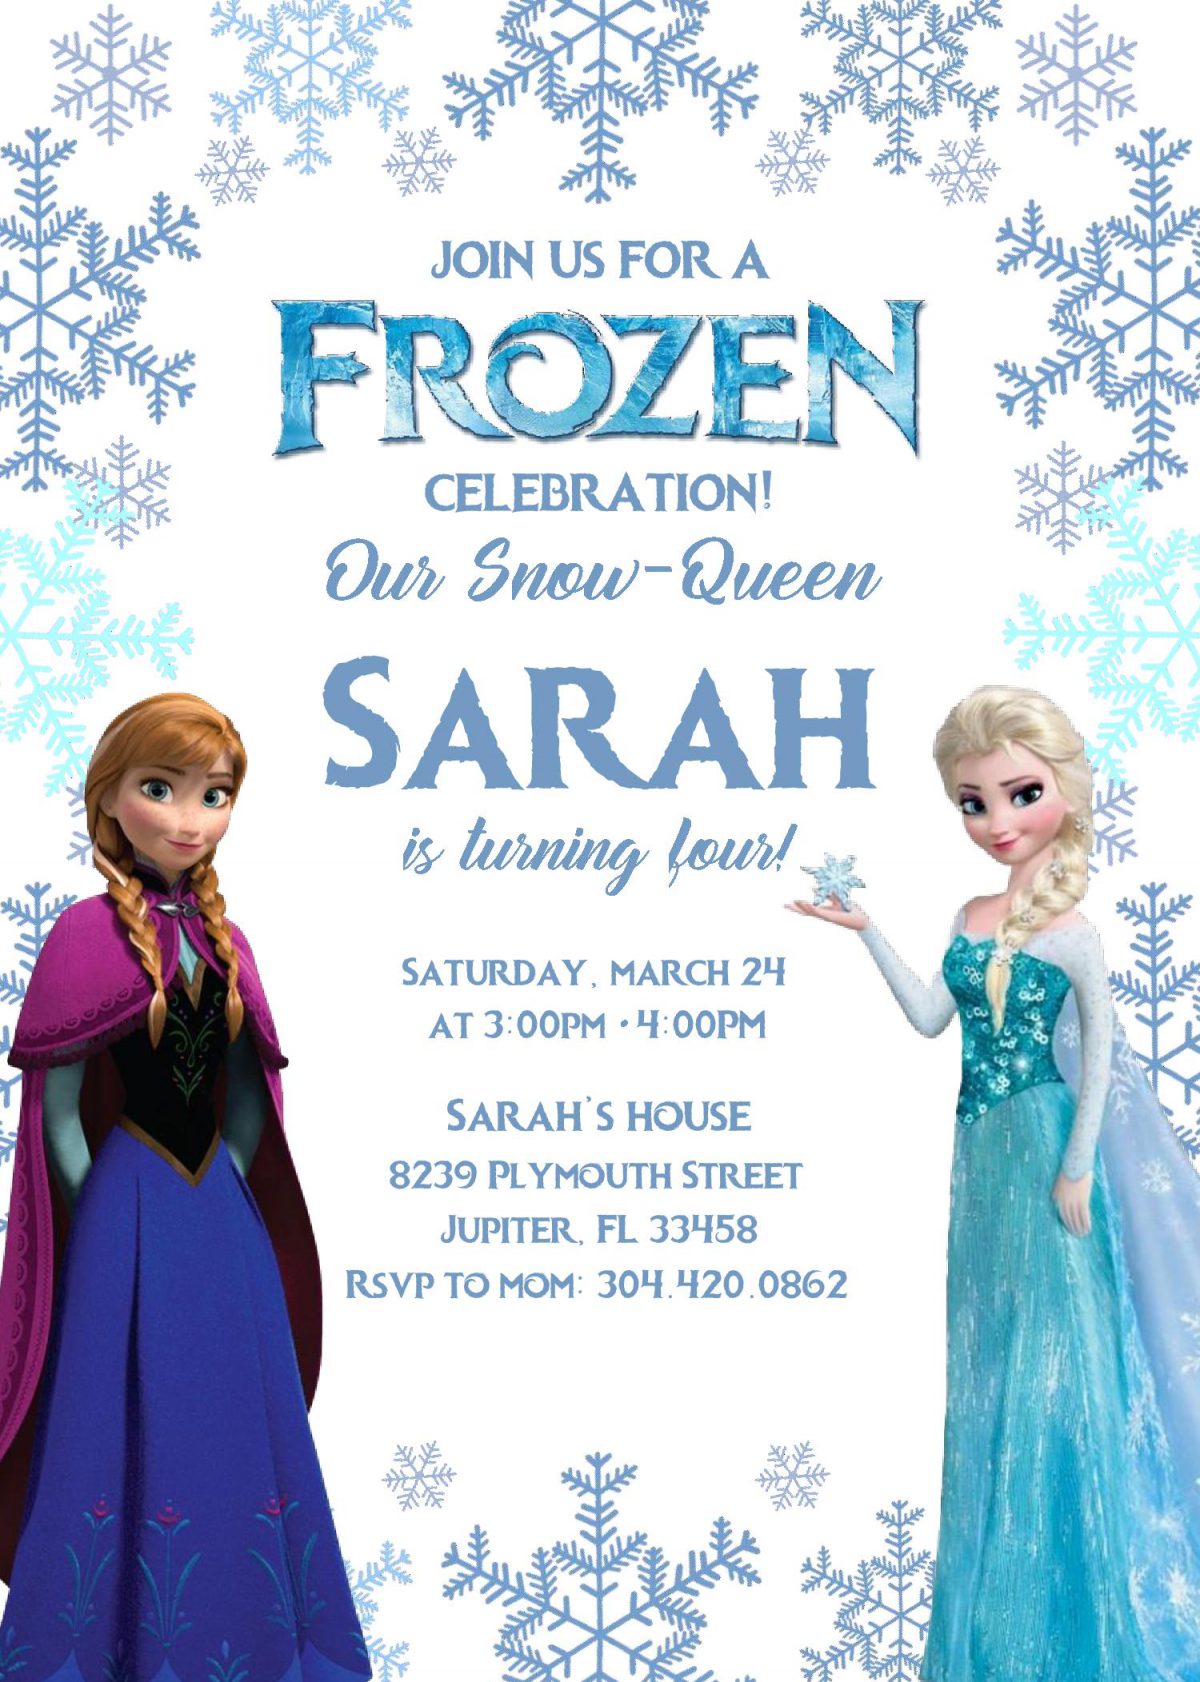 Frozen Invitation Templates - Editable With MS Word and has anna and elsa